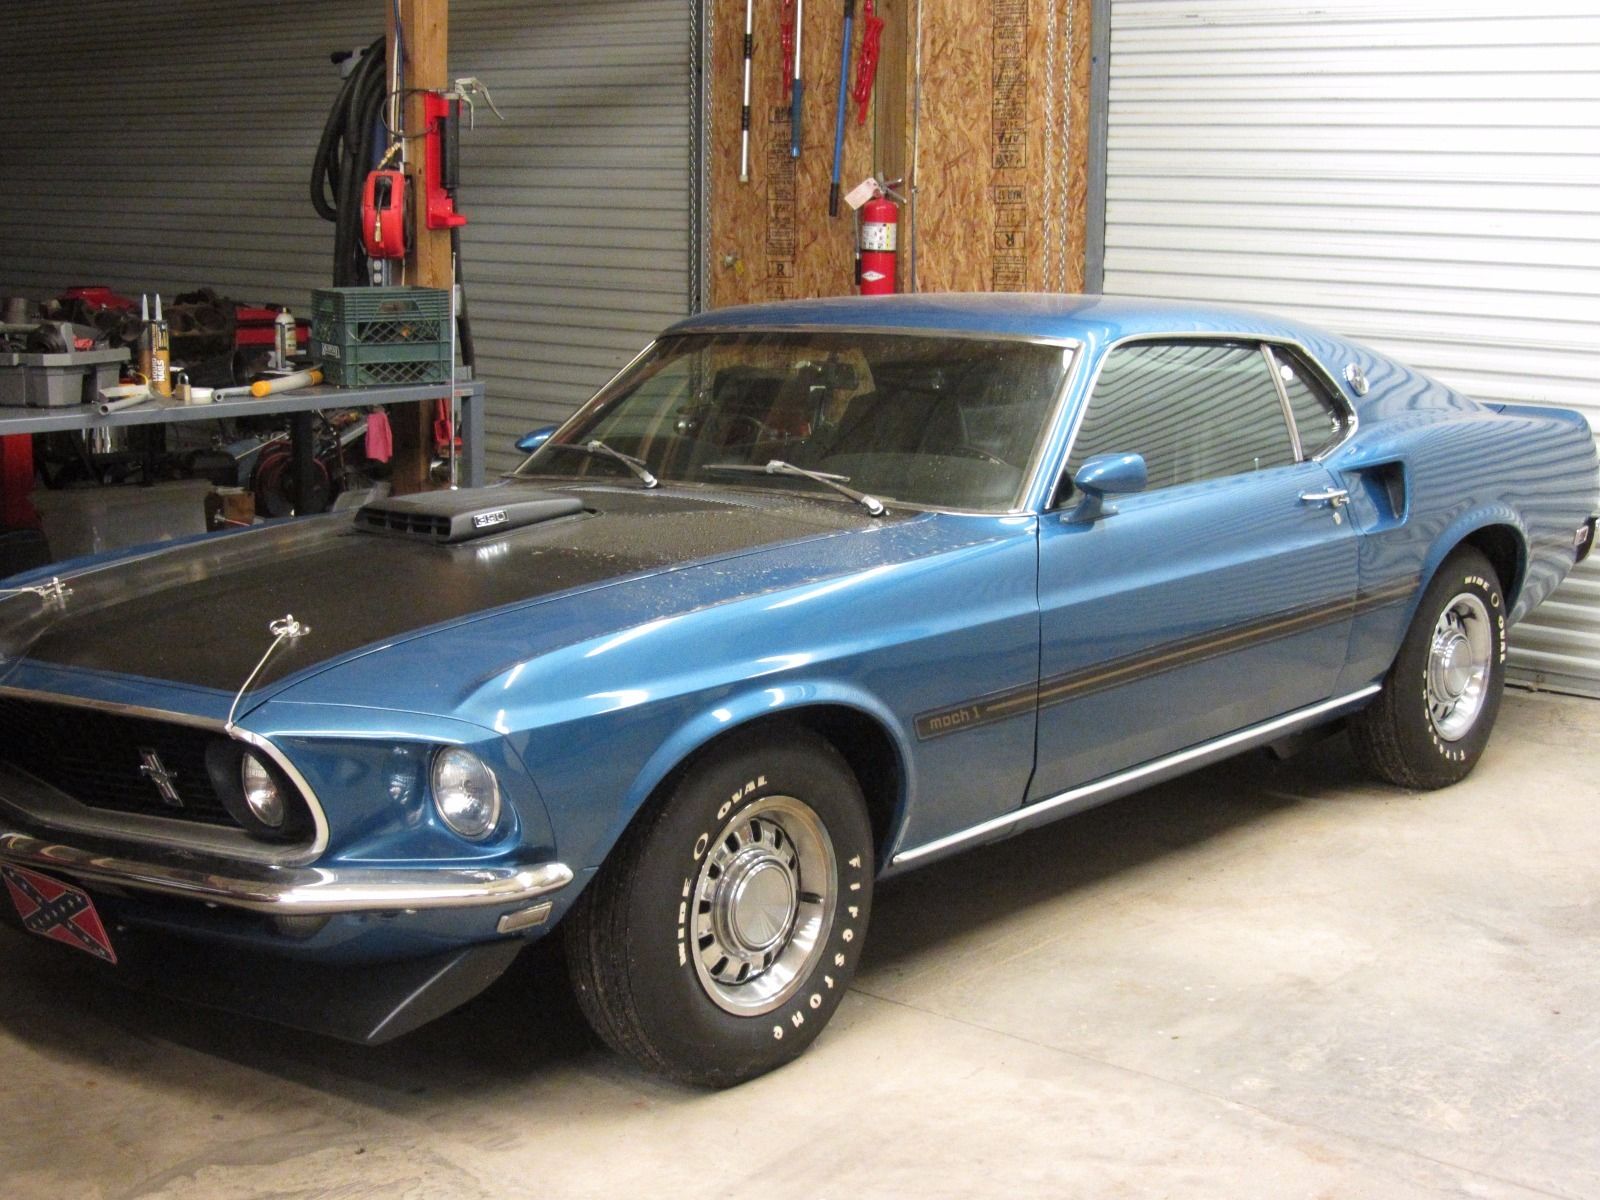 One-Off 1969 Ford Mustang Is An eBay Steal